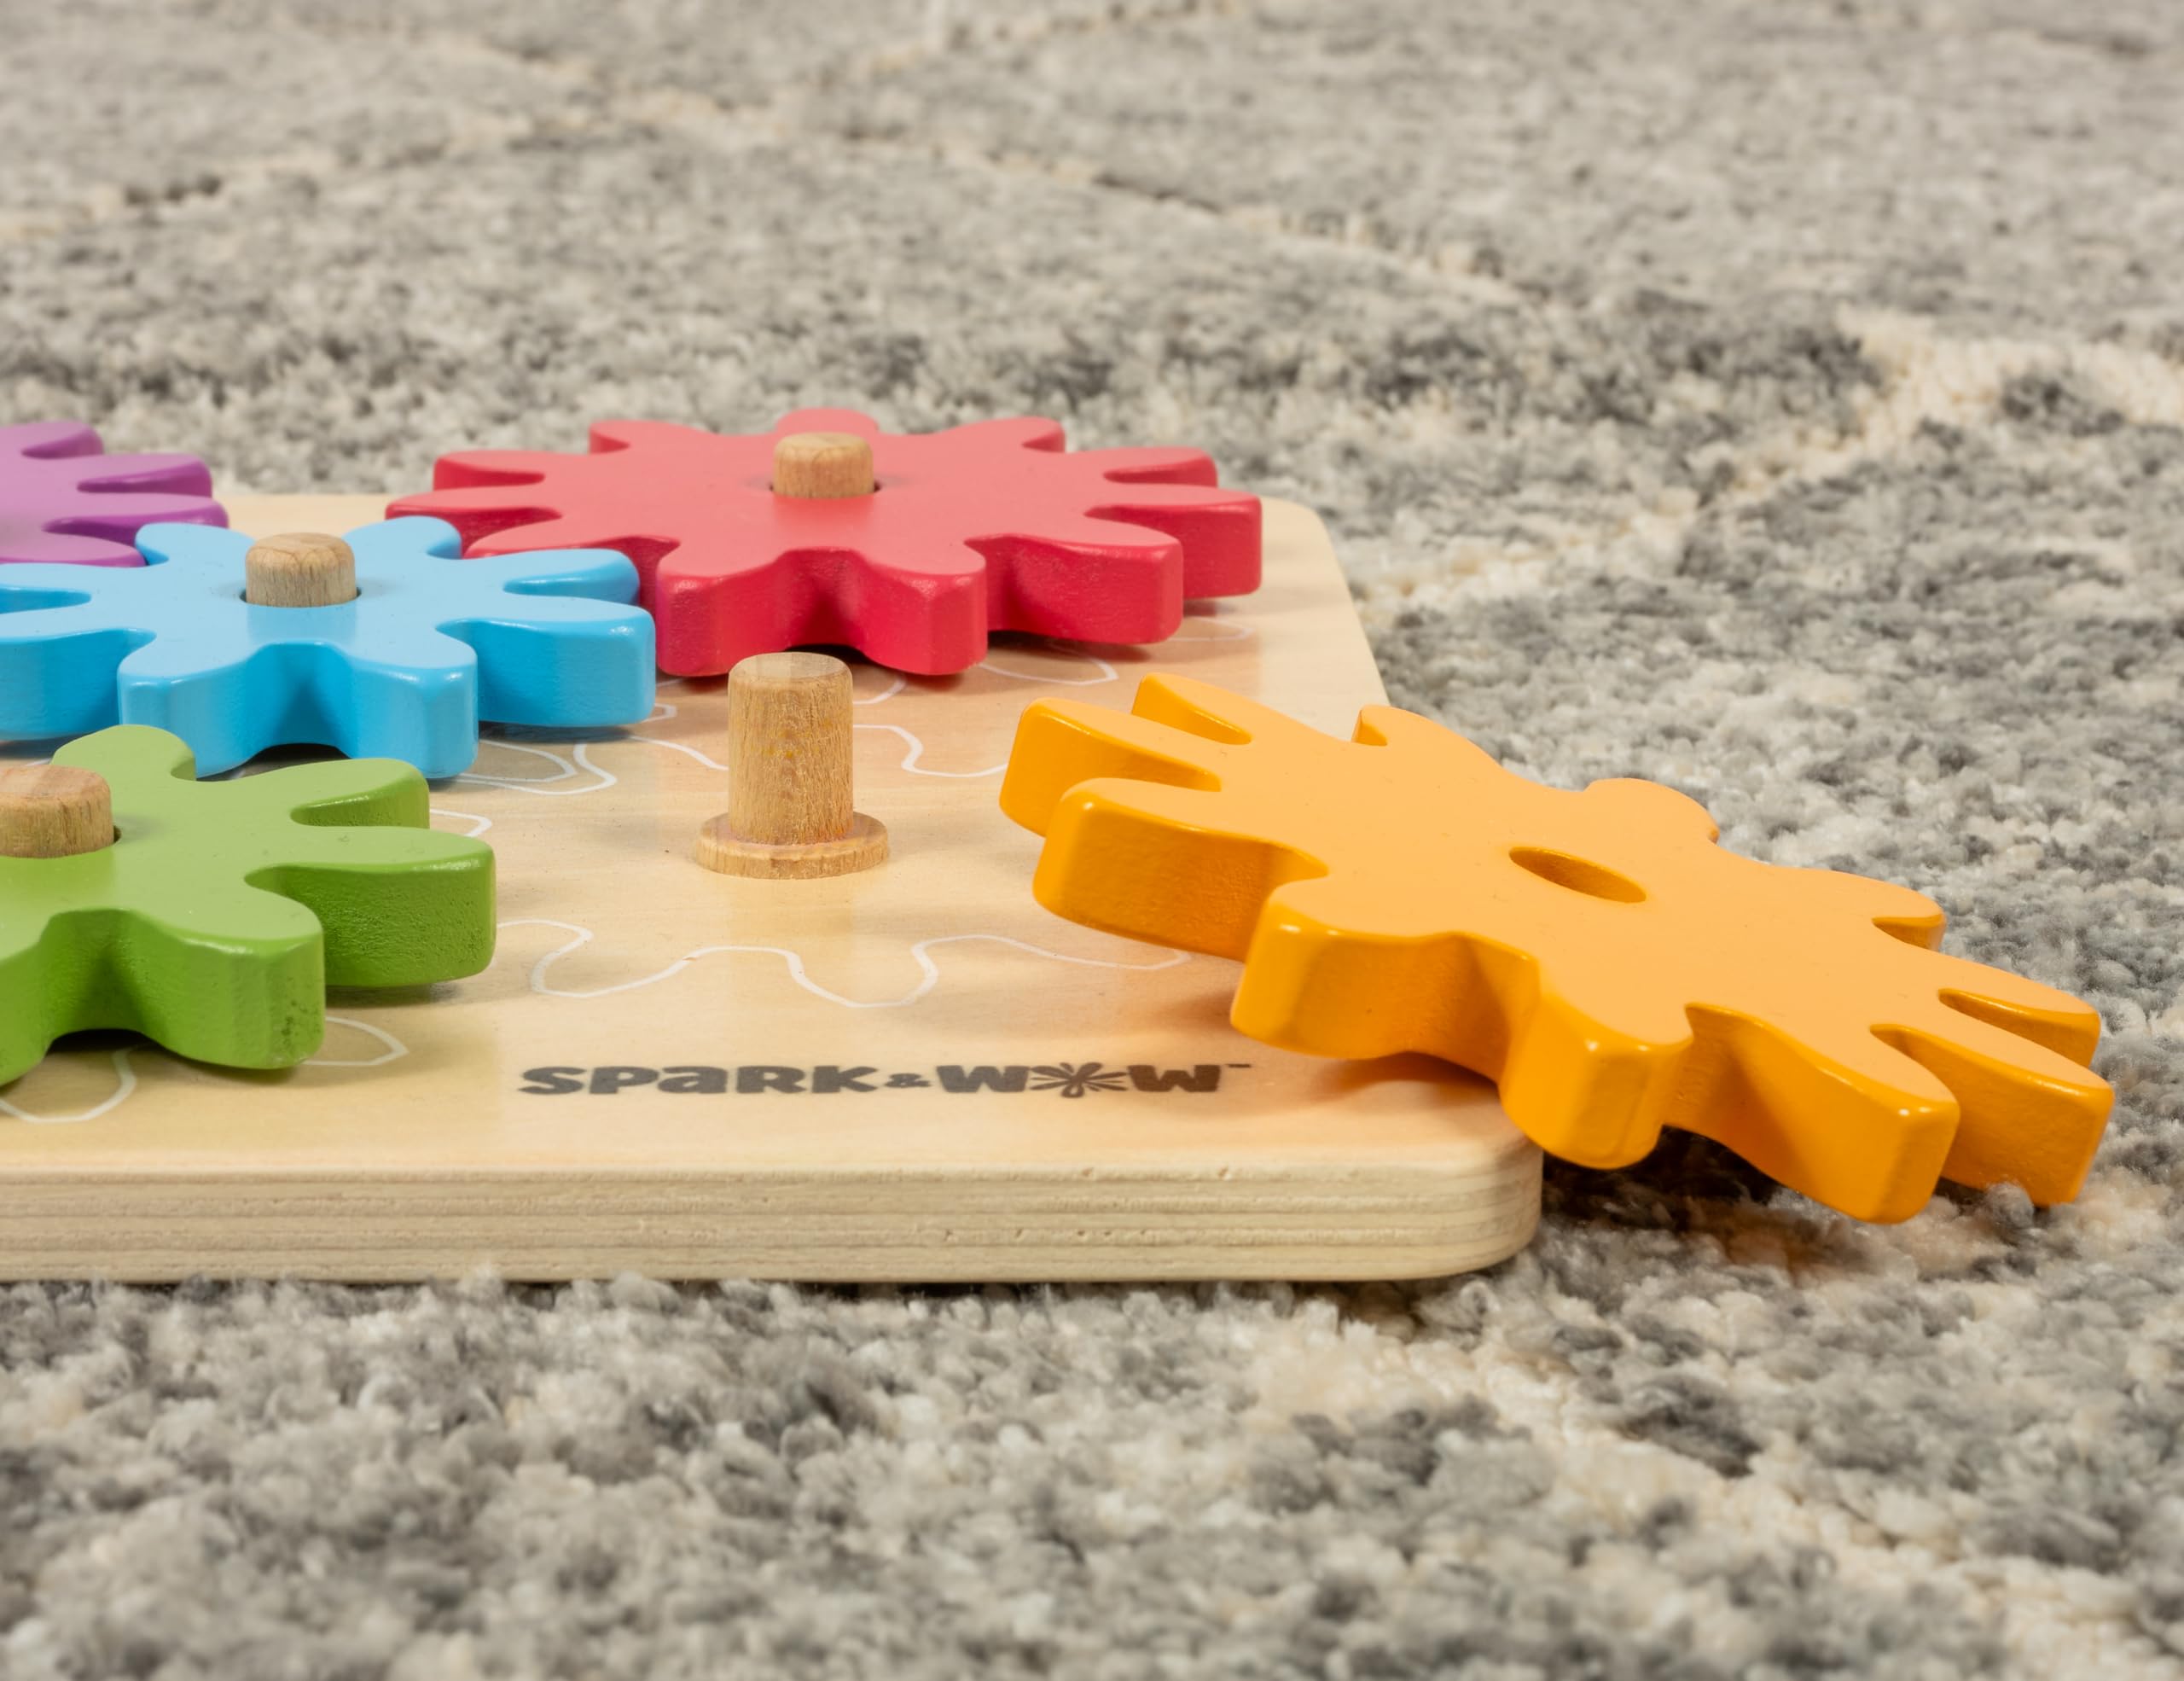 SPARK & WOW Spinny Gears - Wooden Gear Board with 6 Pieces in 3 Sizes - Gear Puzzle for Kids - Create Colorful, Spinning Combinations